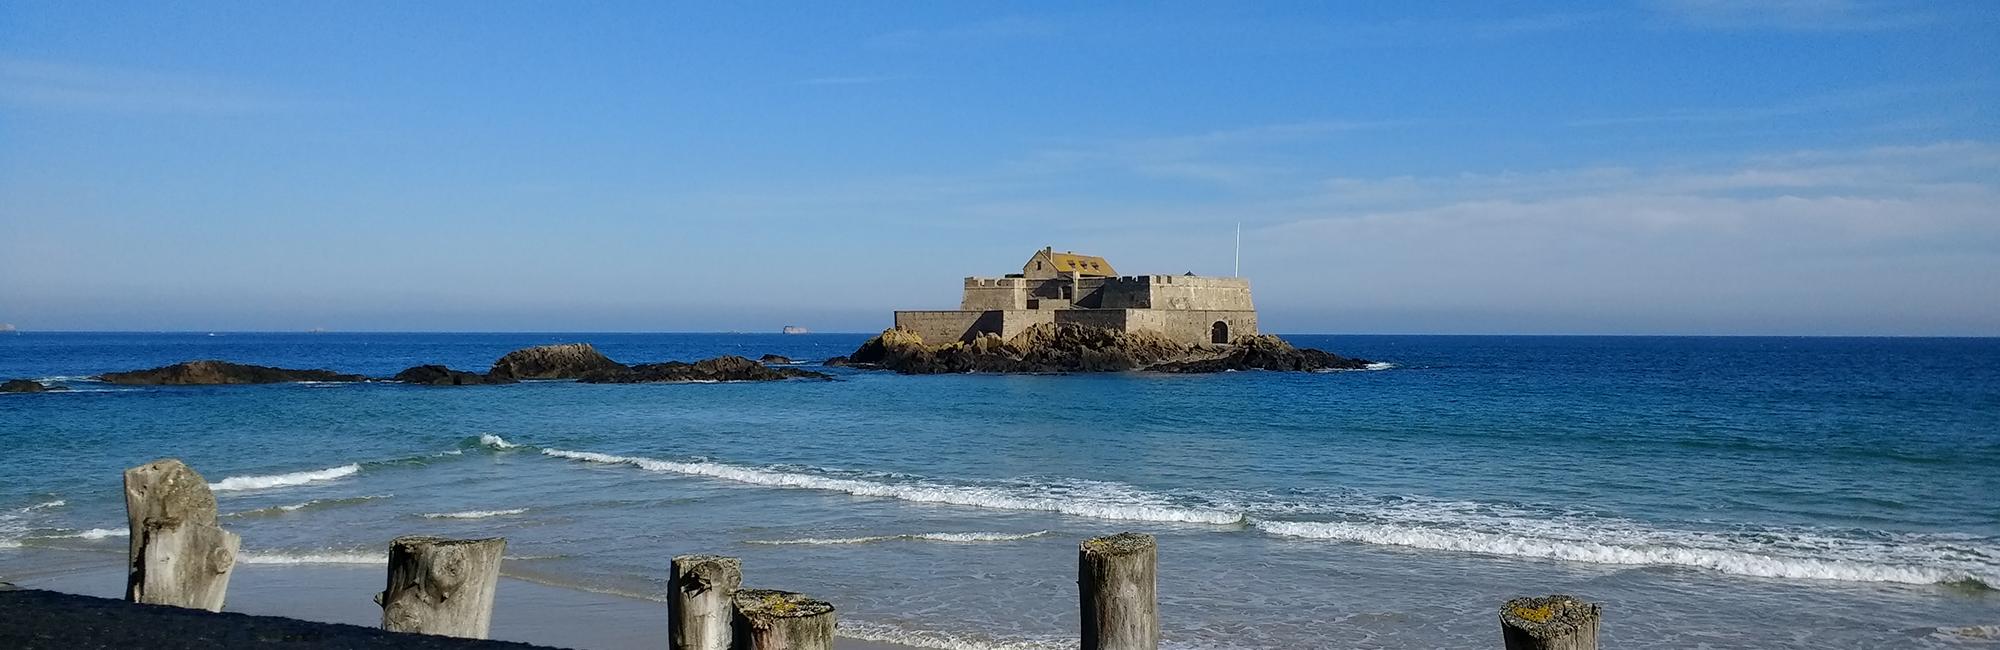 visit st malo in brittany